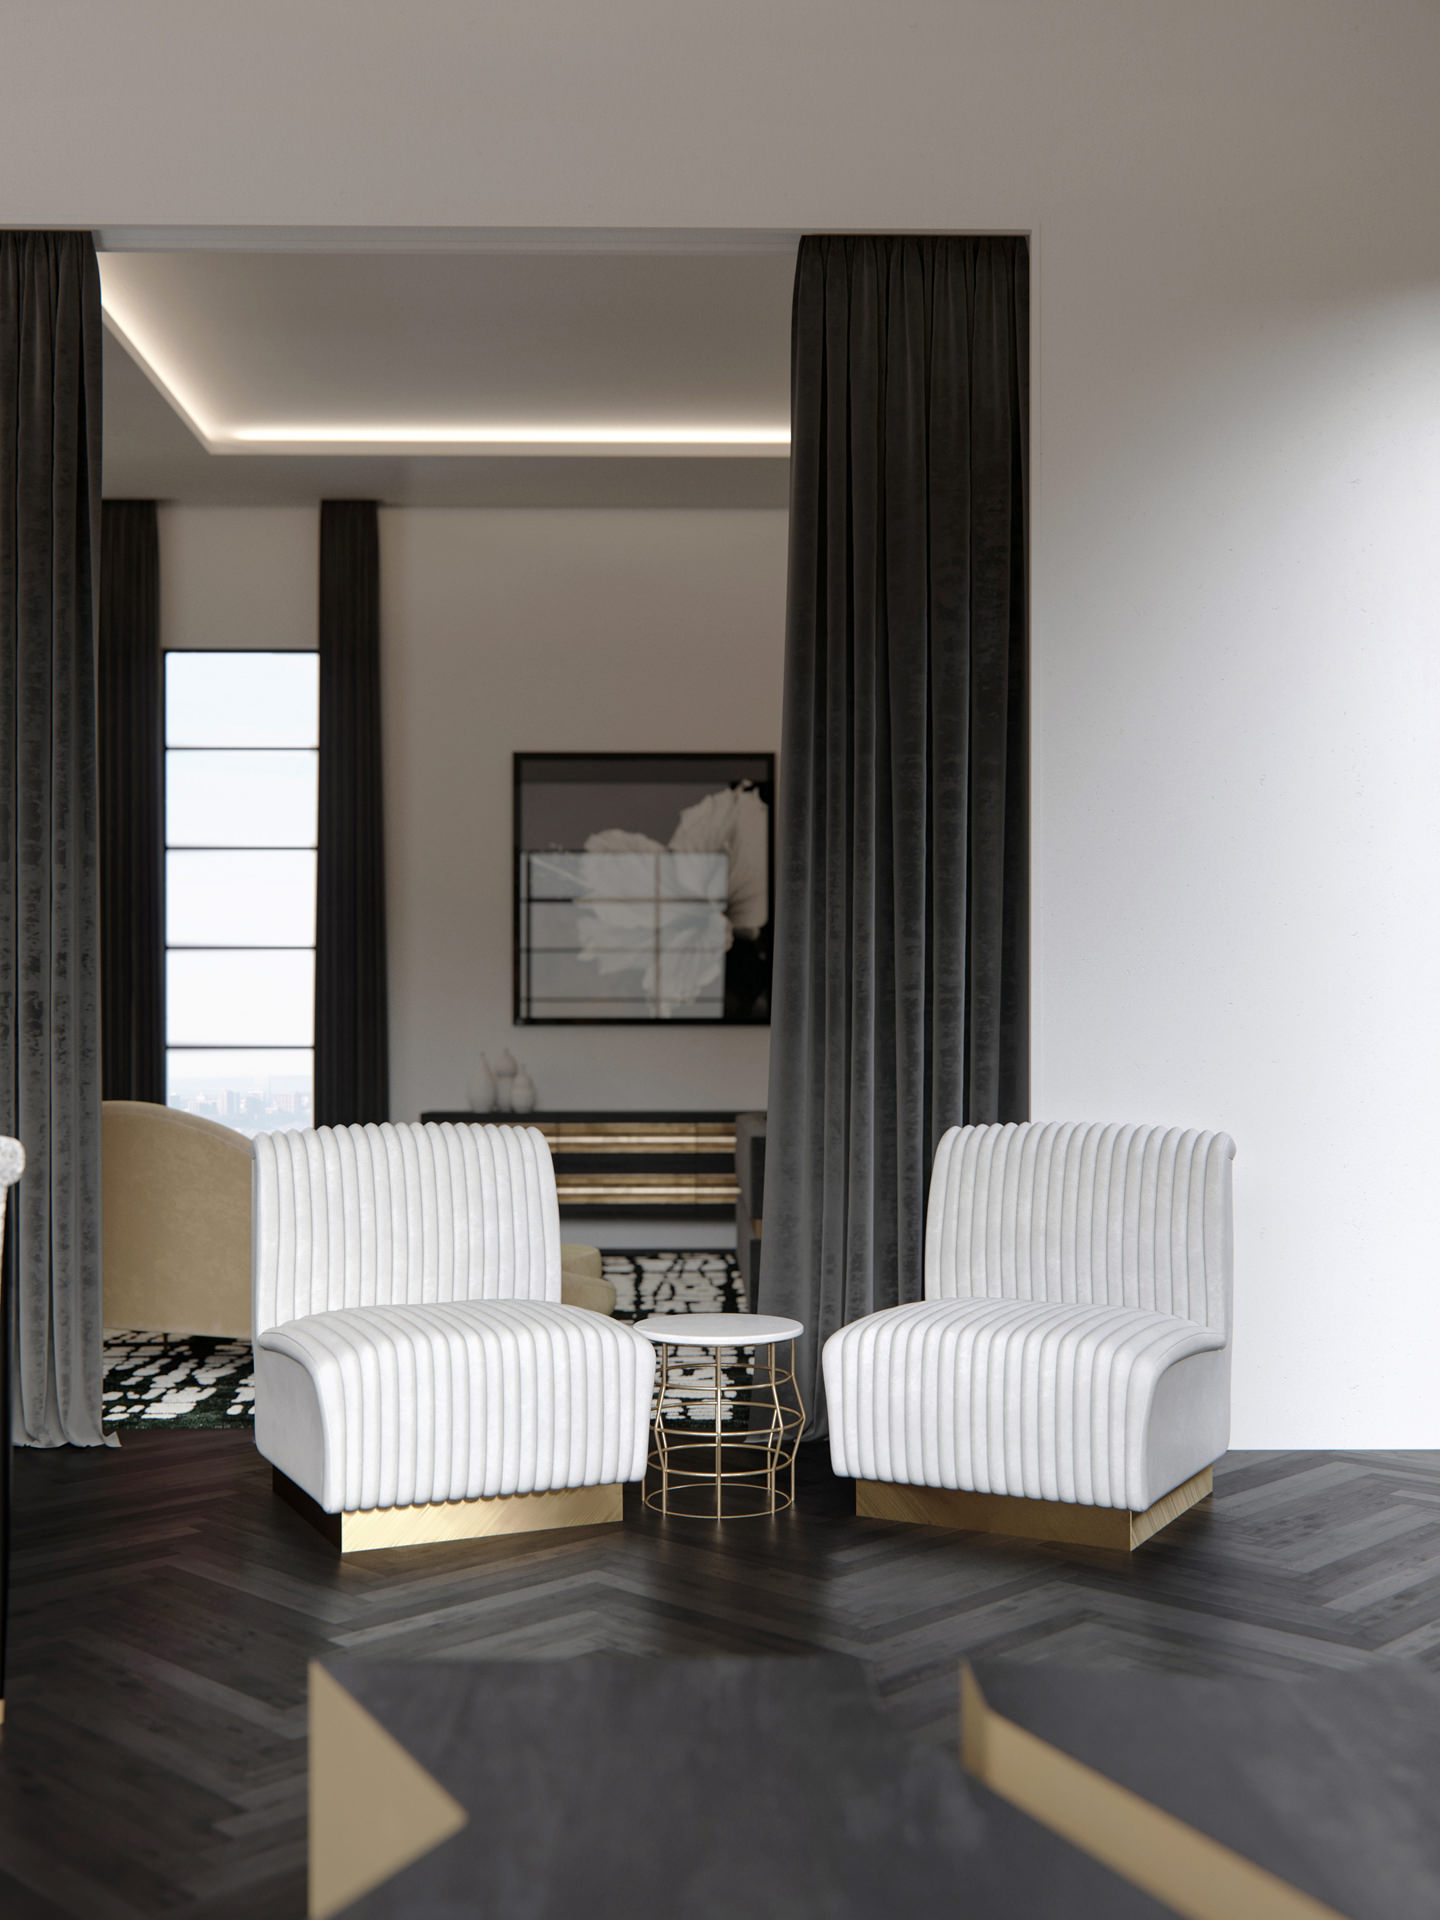 3D furniture rendering of two trendy leather armchairs and a golden grid-based side table in a loft interior